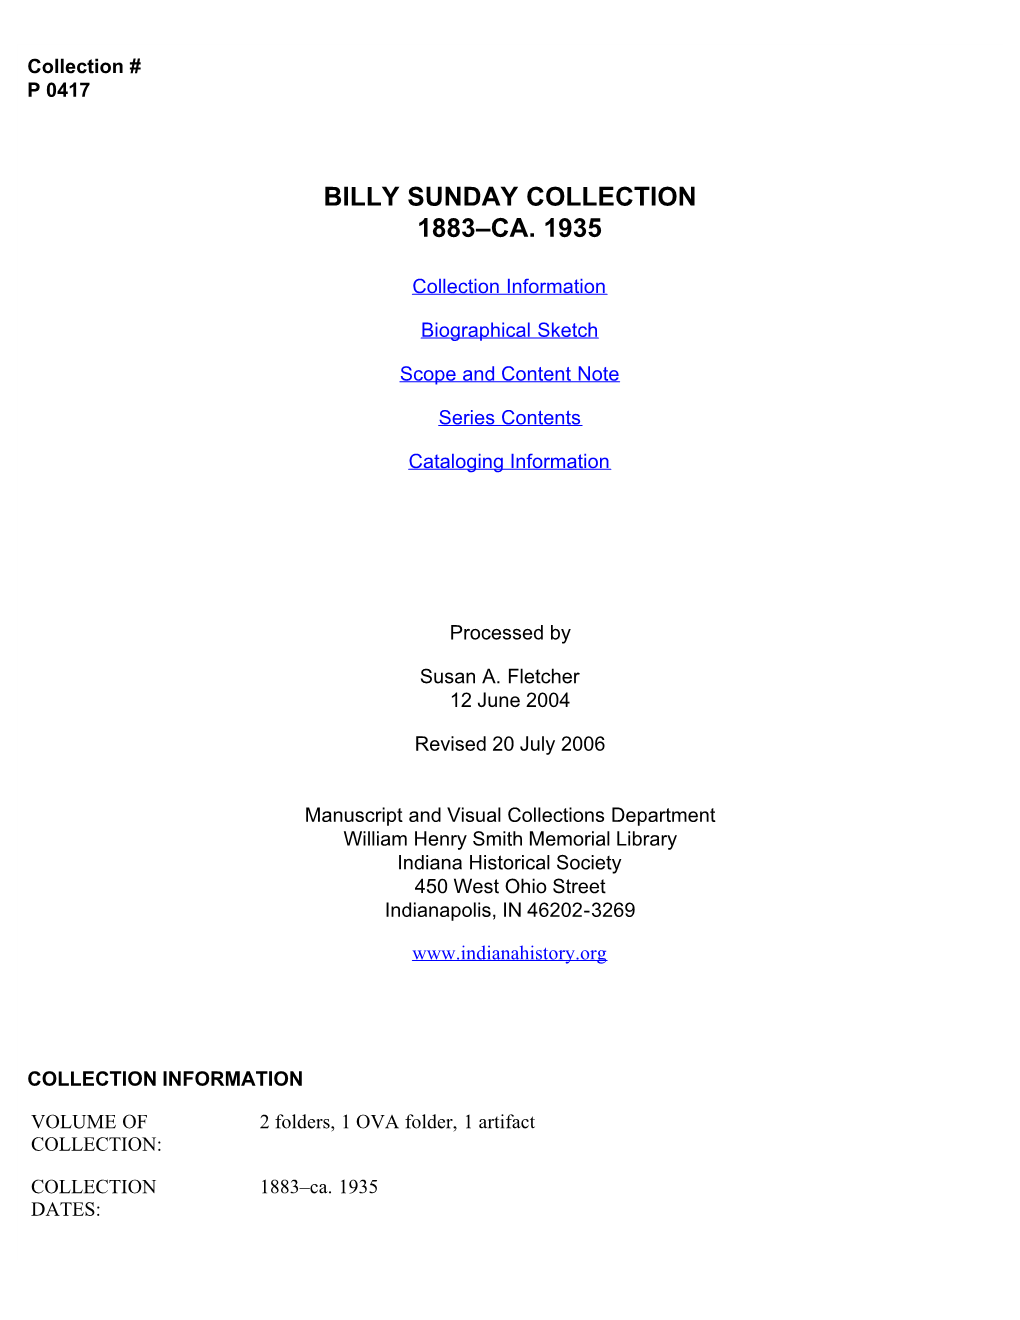 Billy Sunday Collection 1883-Ca. 1935